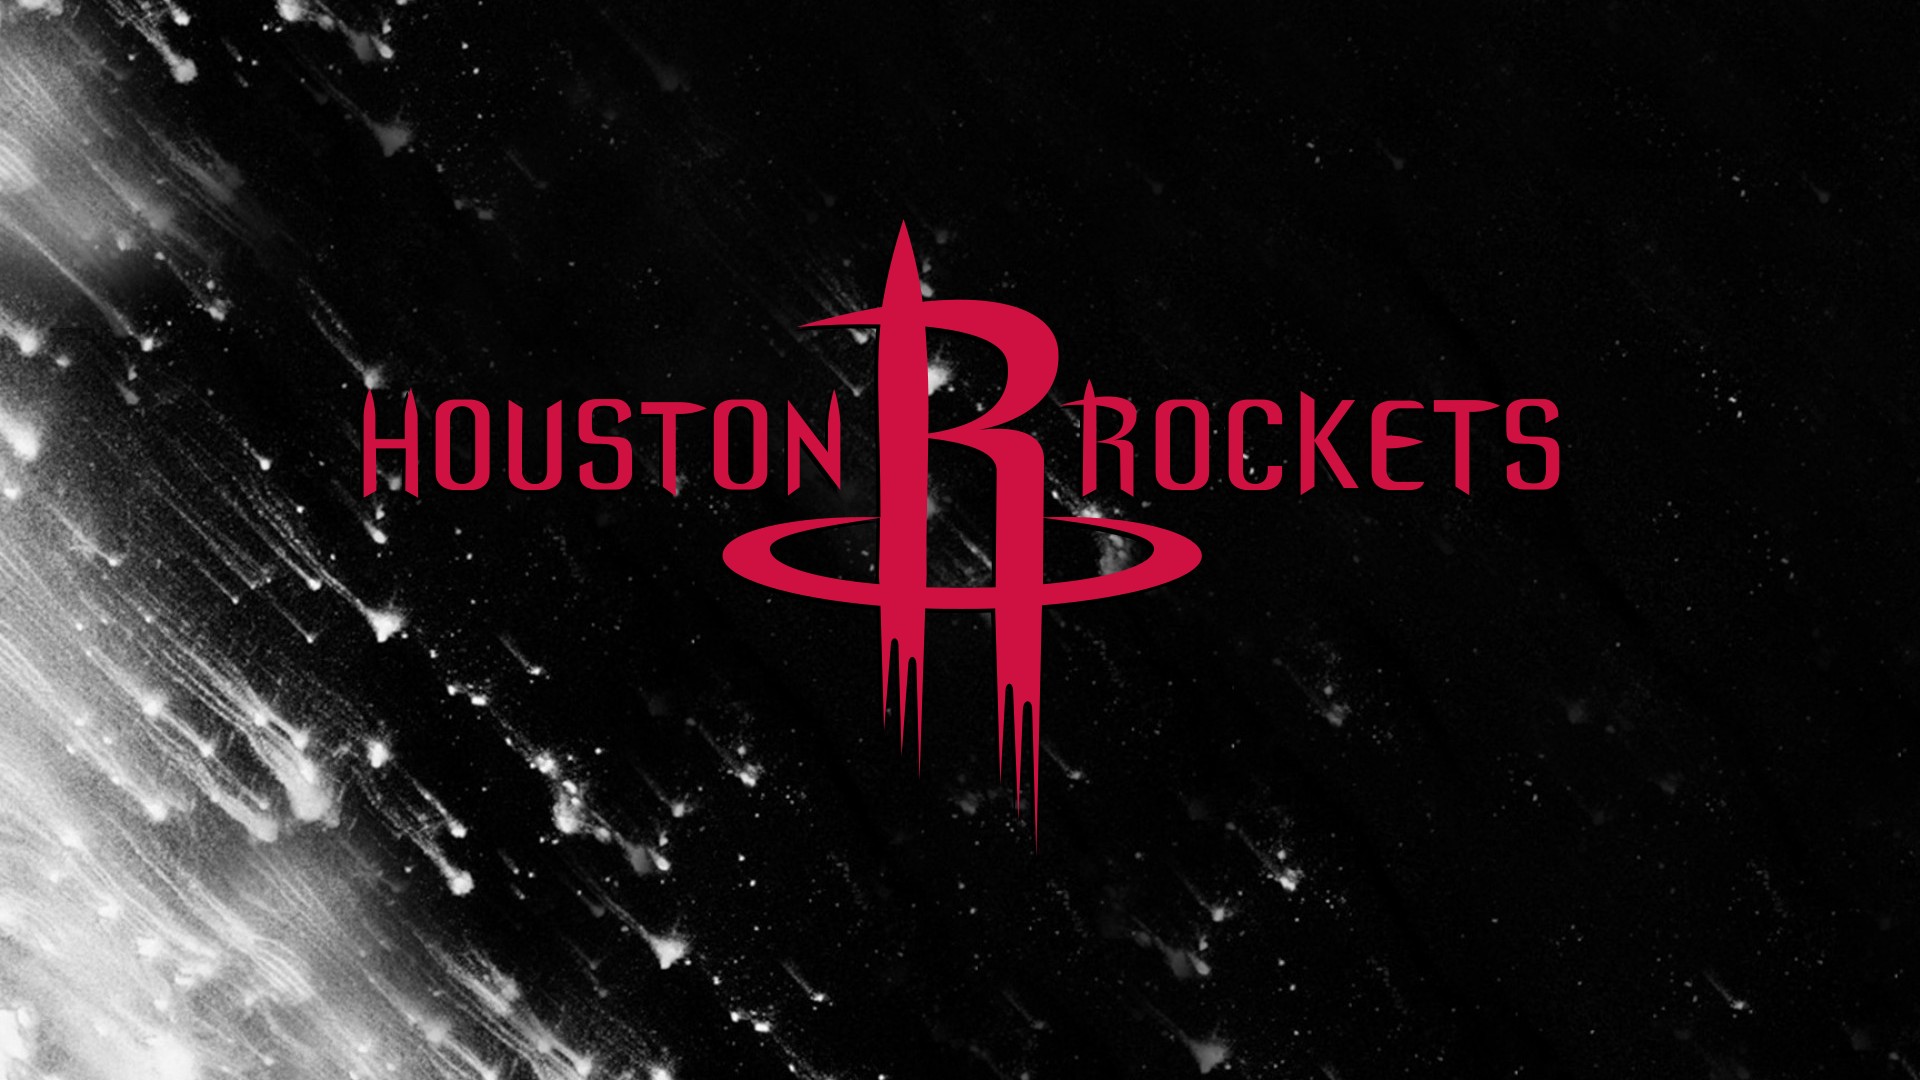 Houston Basketball Desktop Wallpaper with image dimensions 1920x1080 pixel. You can make this wallpaper for your Desktop Computer Backgrounds, Windows or Mac Screensavers, iPhone Lock screen, Tablet or Android and another Mobile Phone device